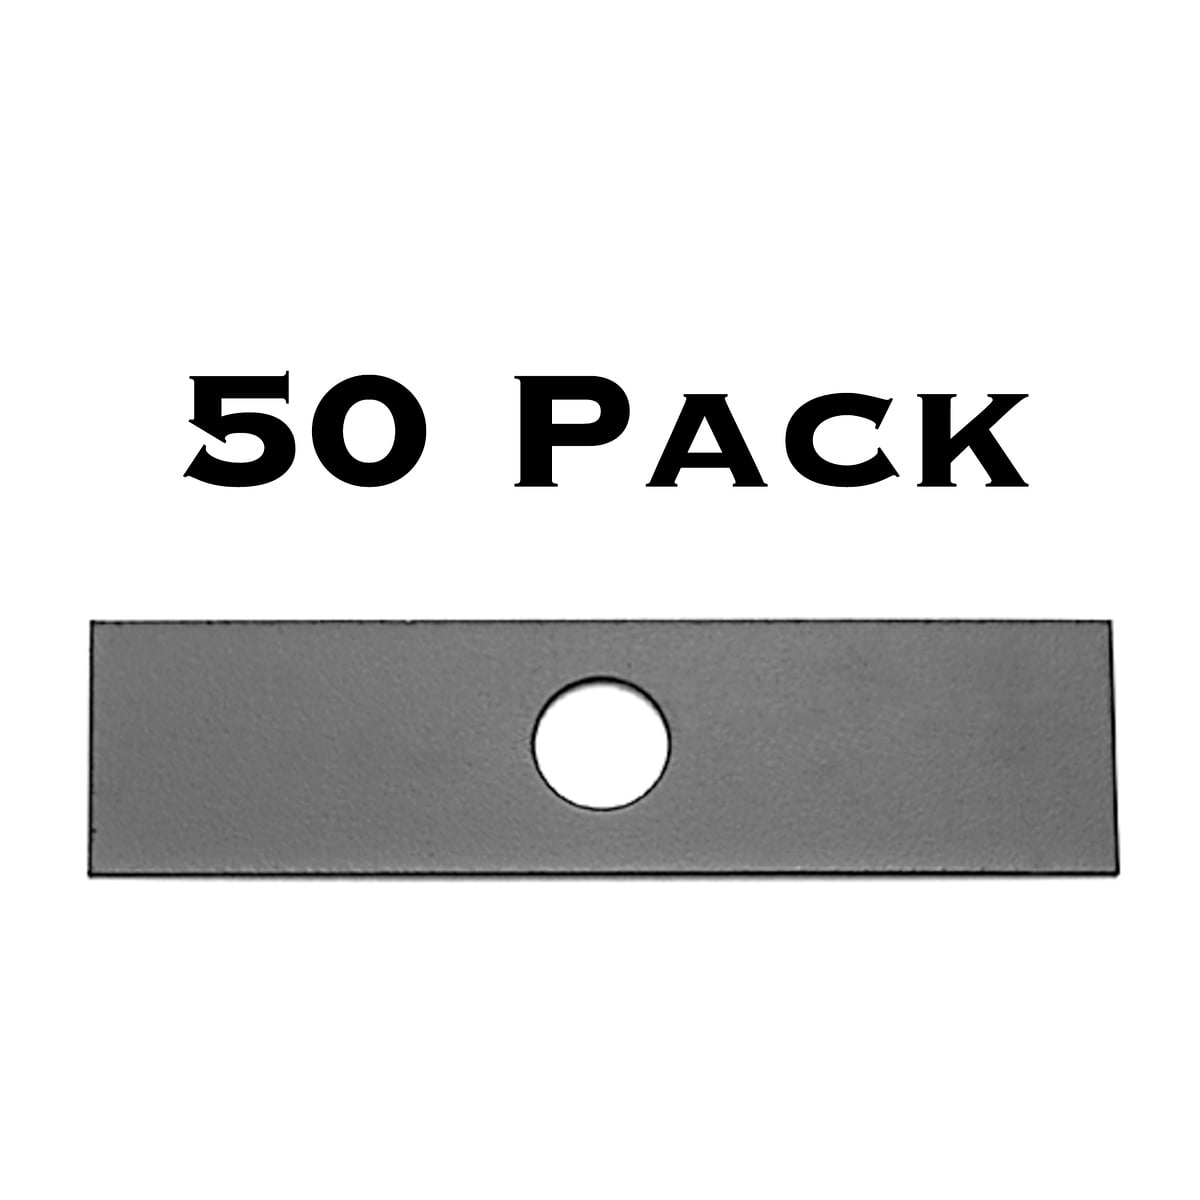 Pack of 50 NEW OREGON Edger Blade 40-141 FREE SHIPPING! 